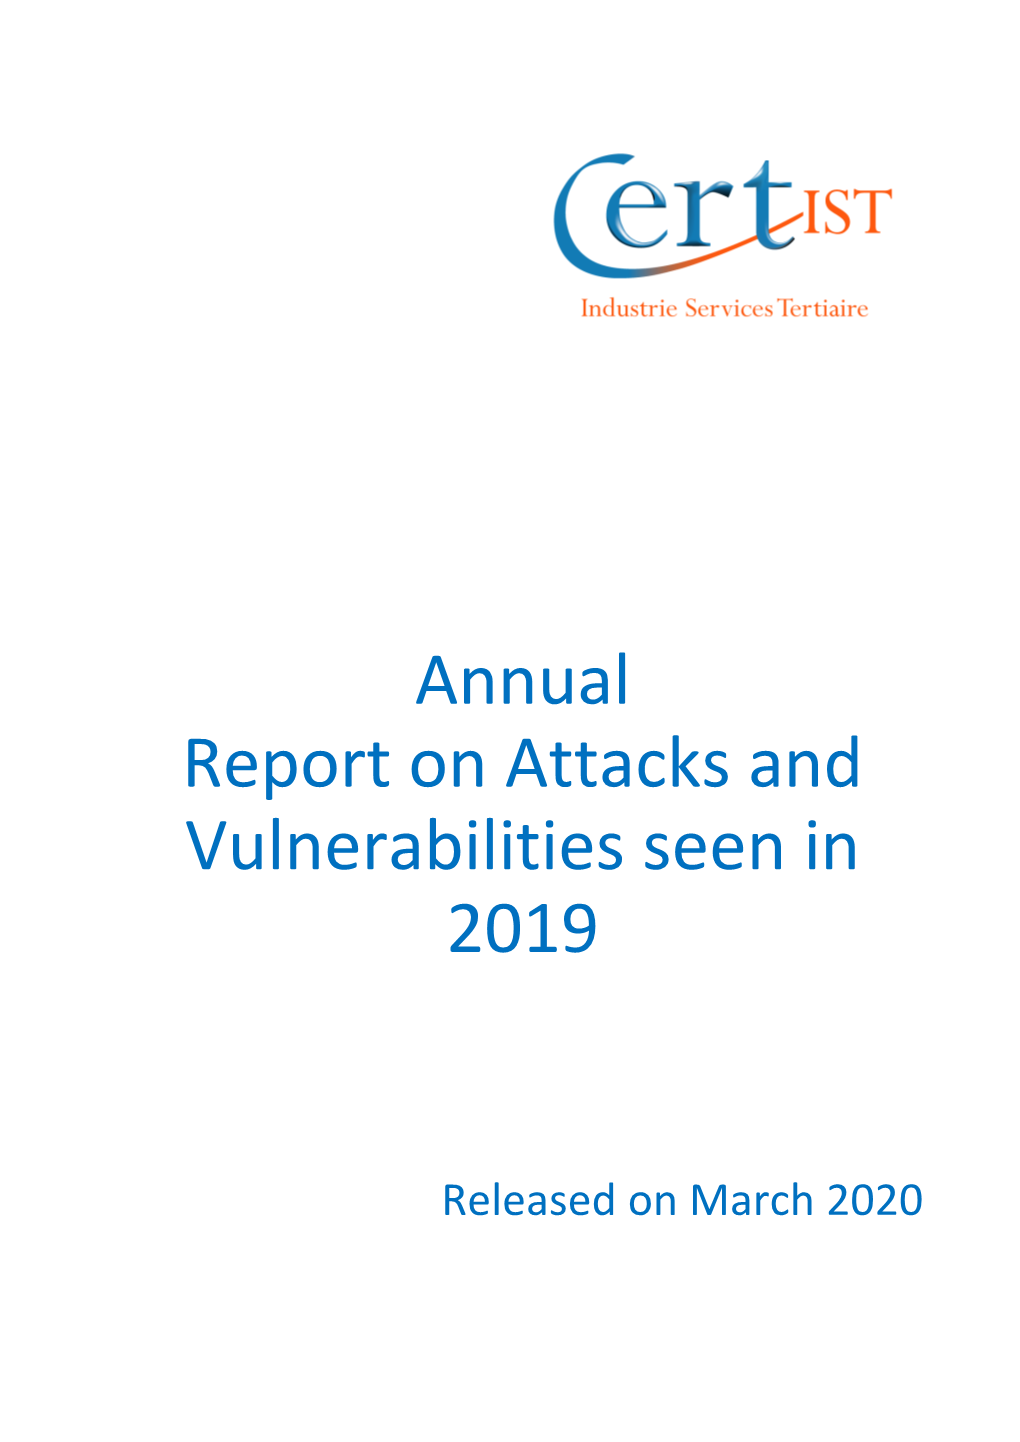 Annual Report on Attacks and Vulnerabilities Seen in 2019